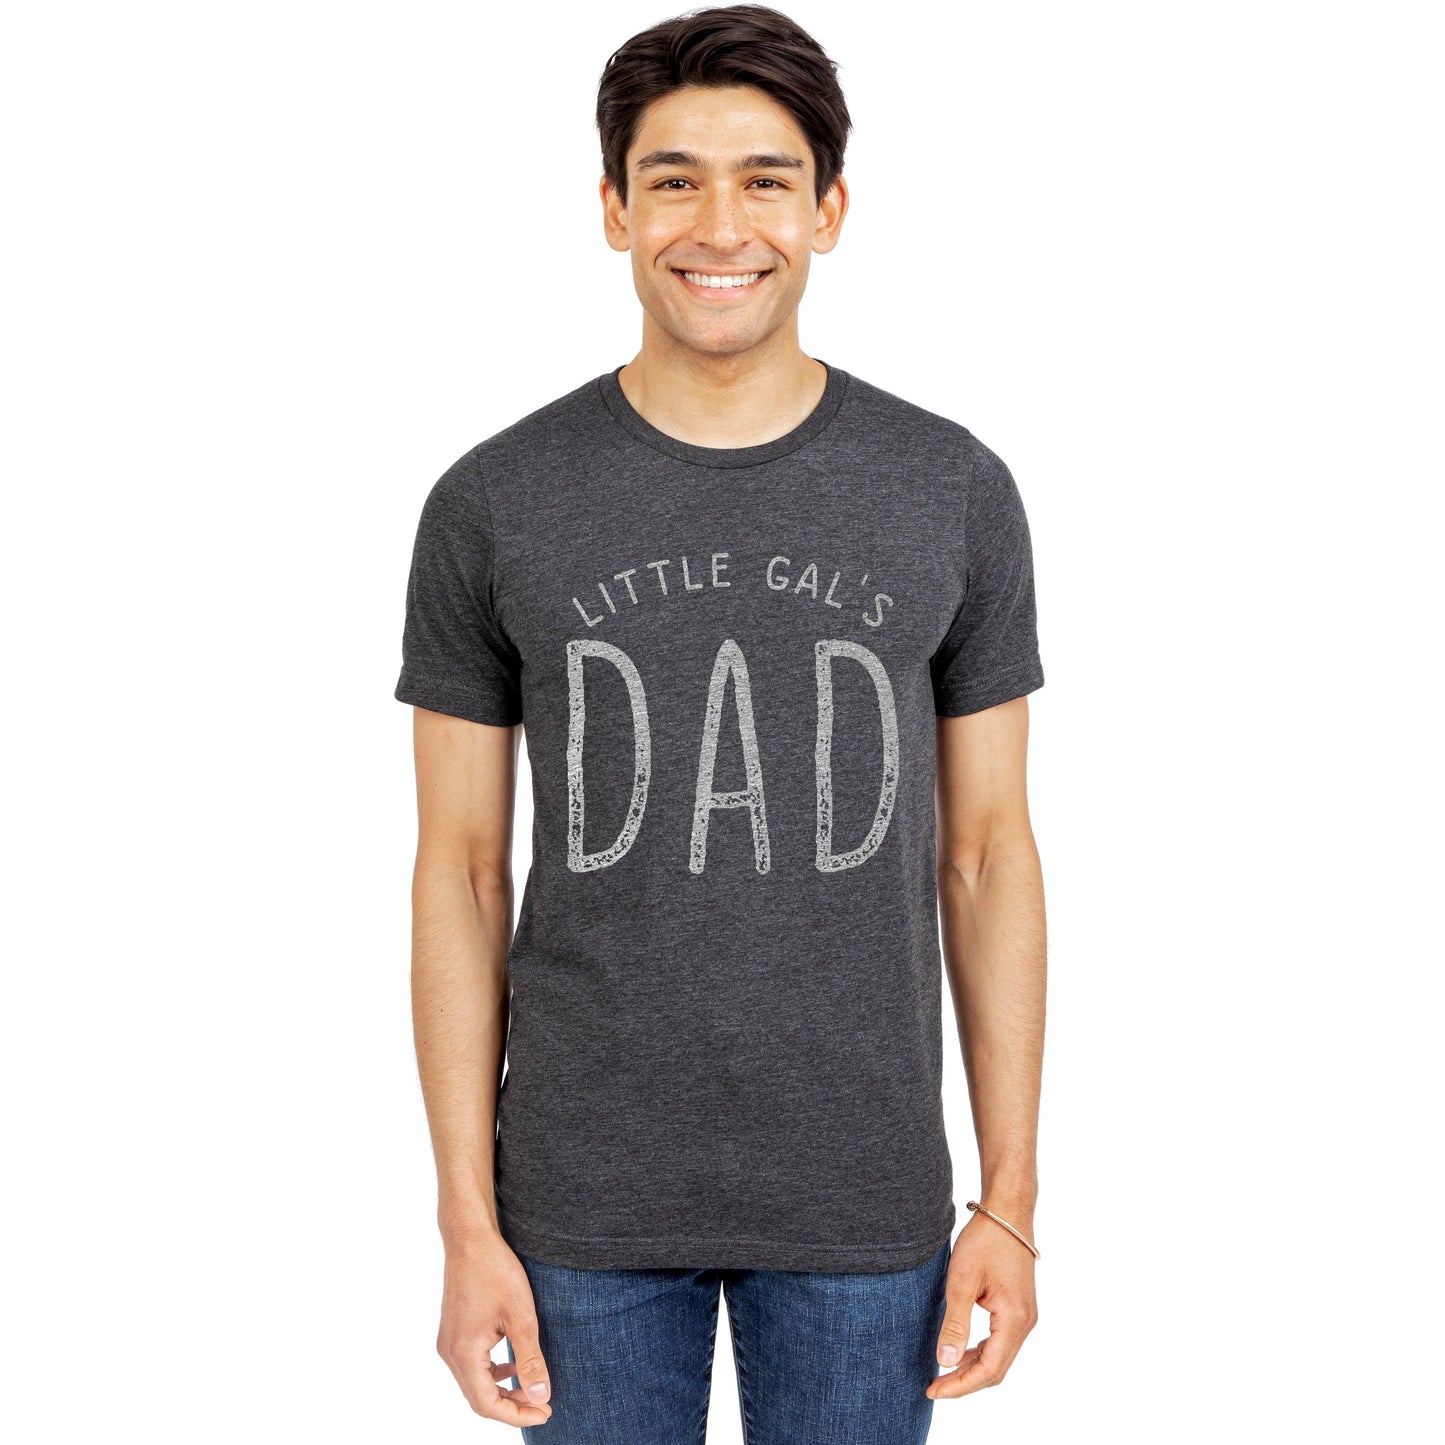 Lil Gal's Dad Charcoal Printed Graphic Men's Crew T-Shirt Tee Model